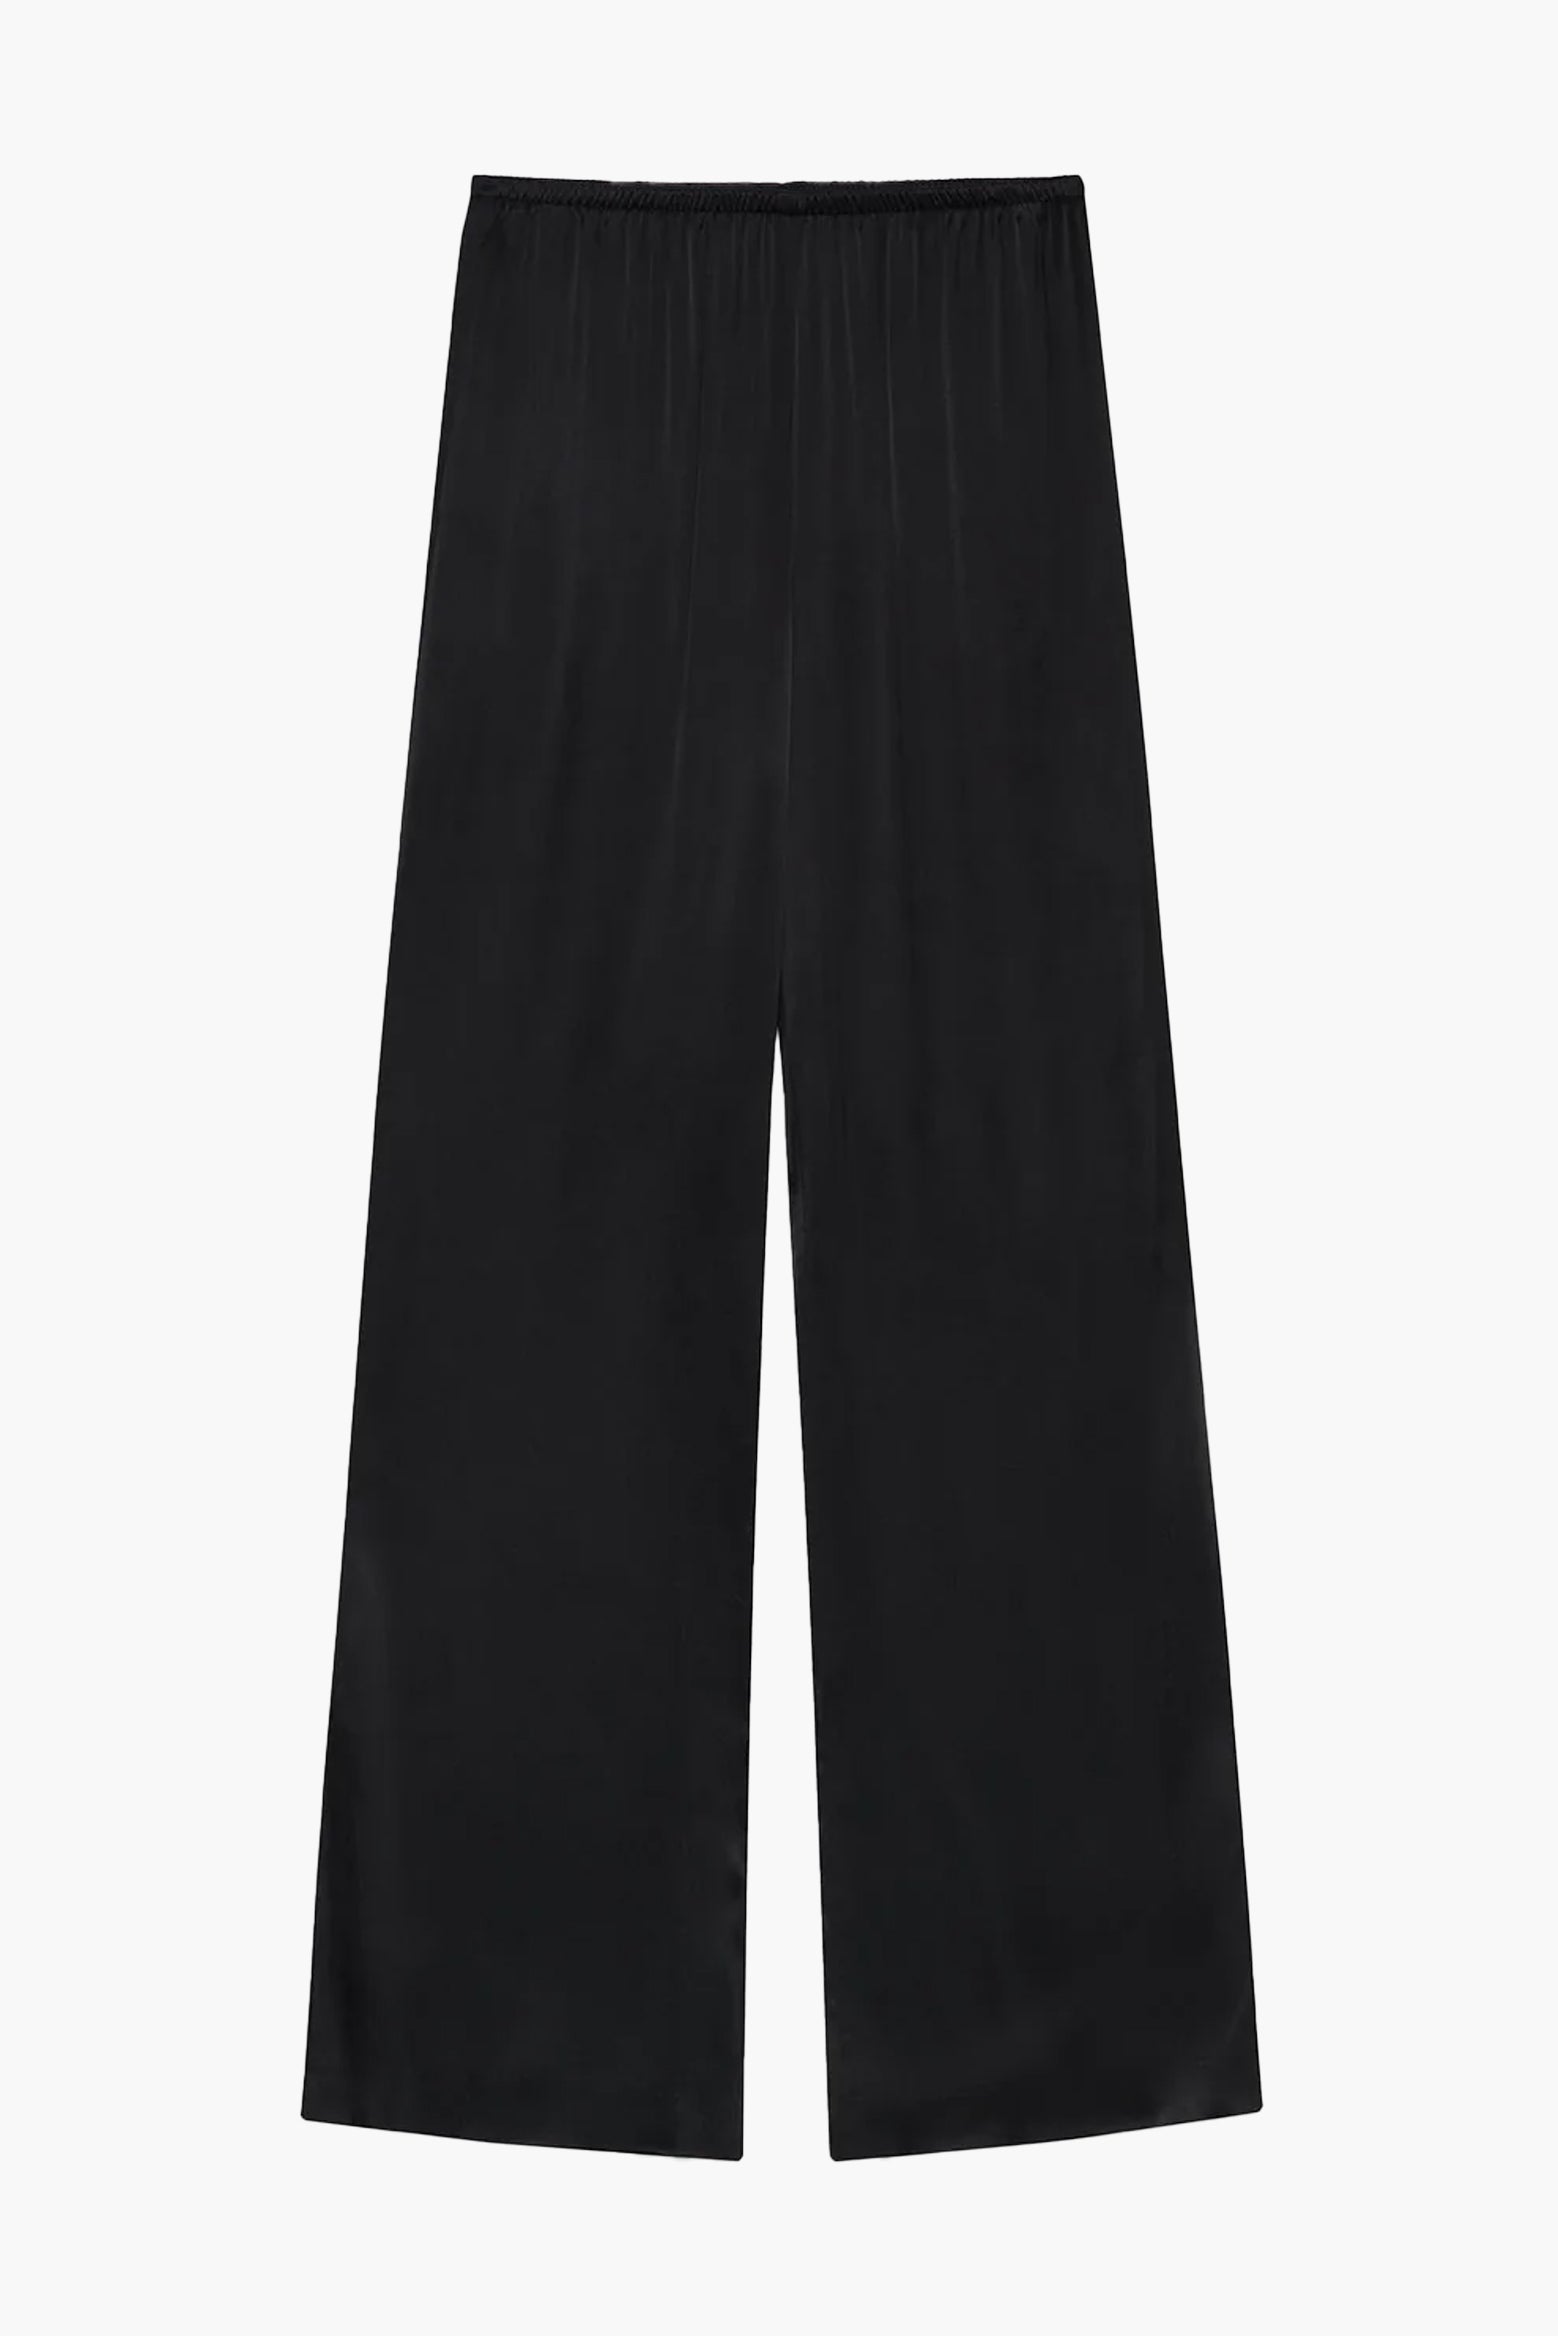 Anine Bing Aden Pant in Black available at The New Trend Australia. 